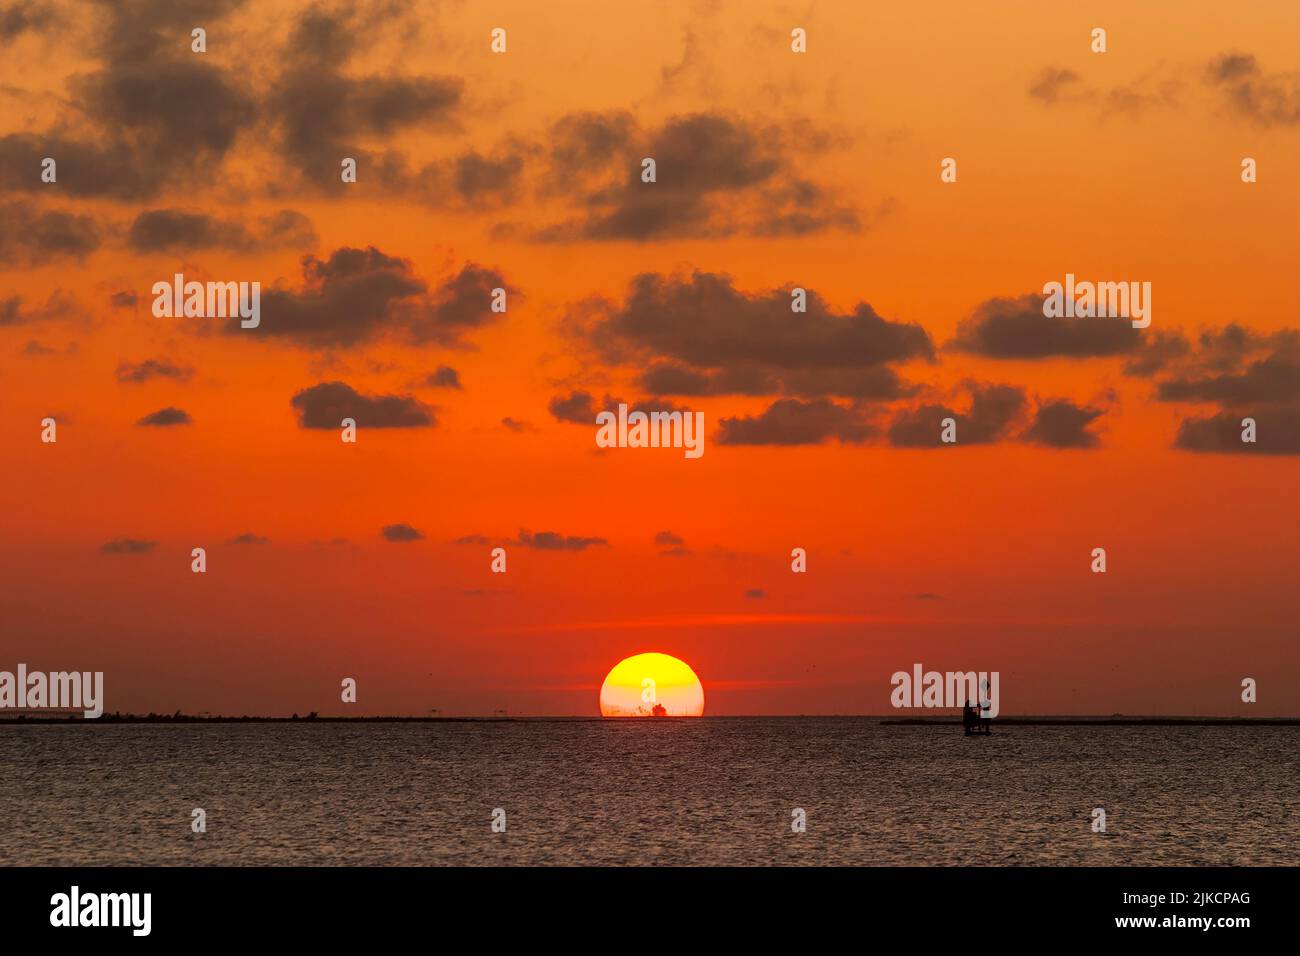 Sunset over Gulf of Mexico Stock Photo